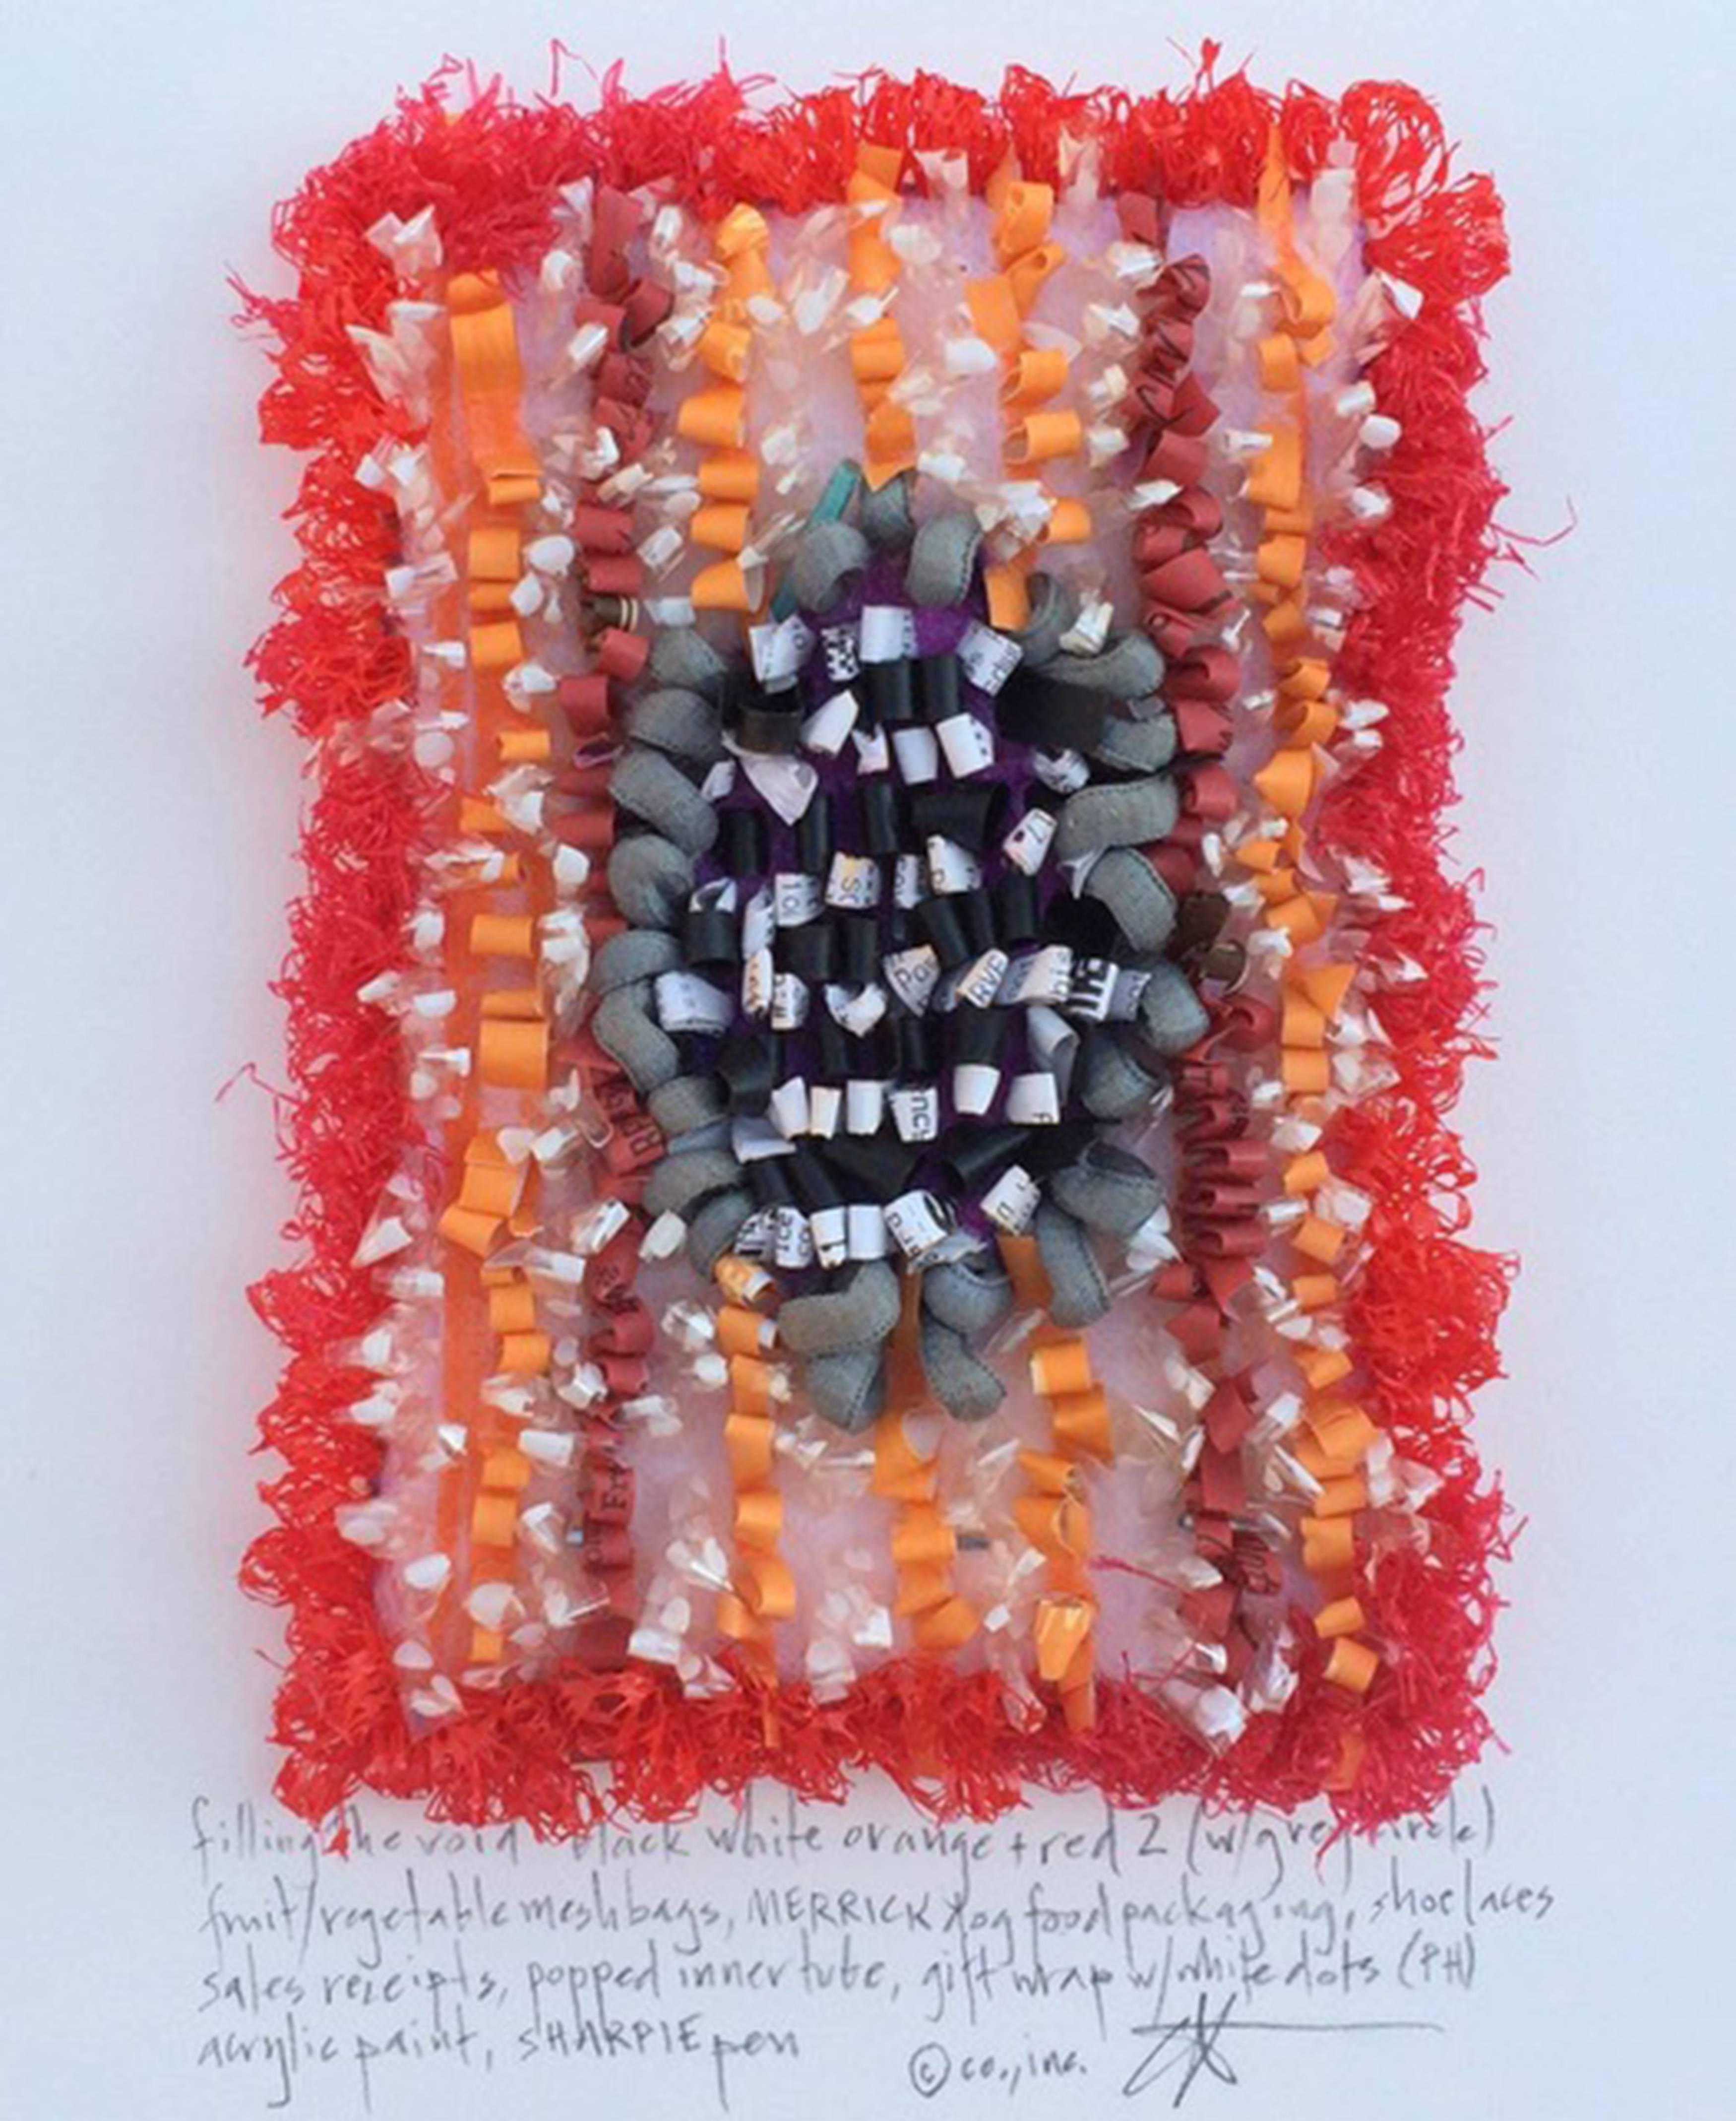 Filling the Void: Black, White, Orange + Red 2 - Mixed Media Art by Constance Old